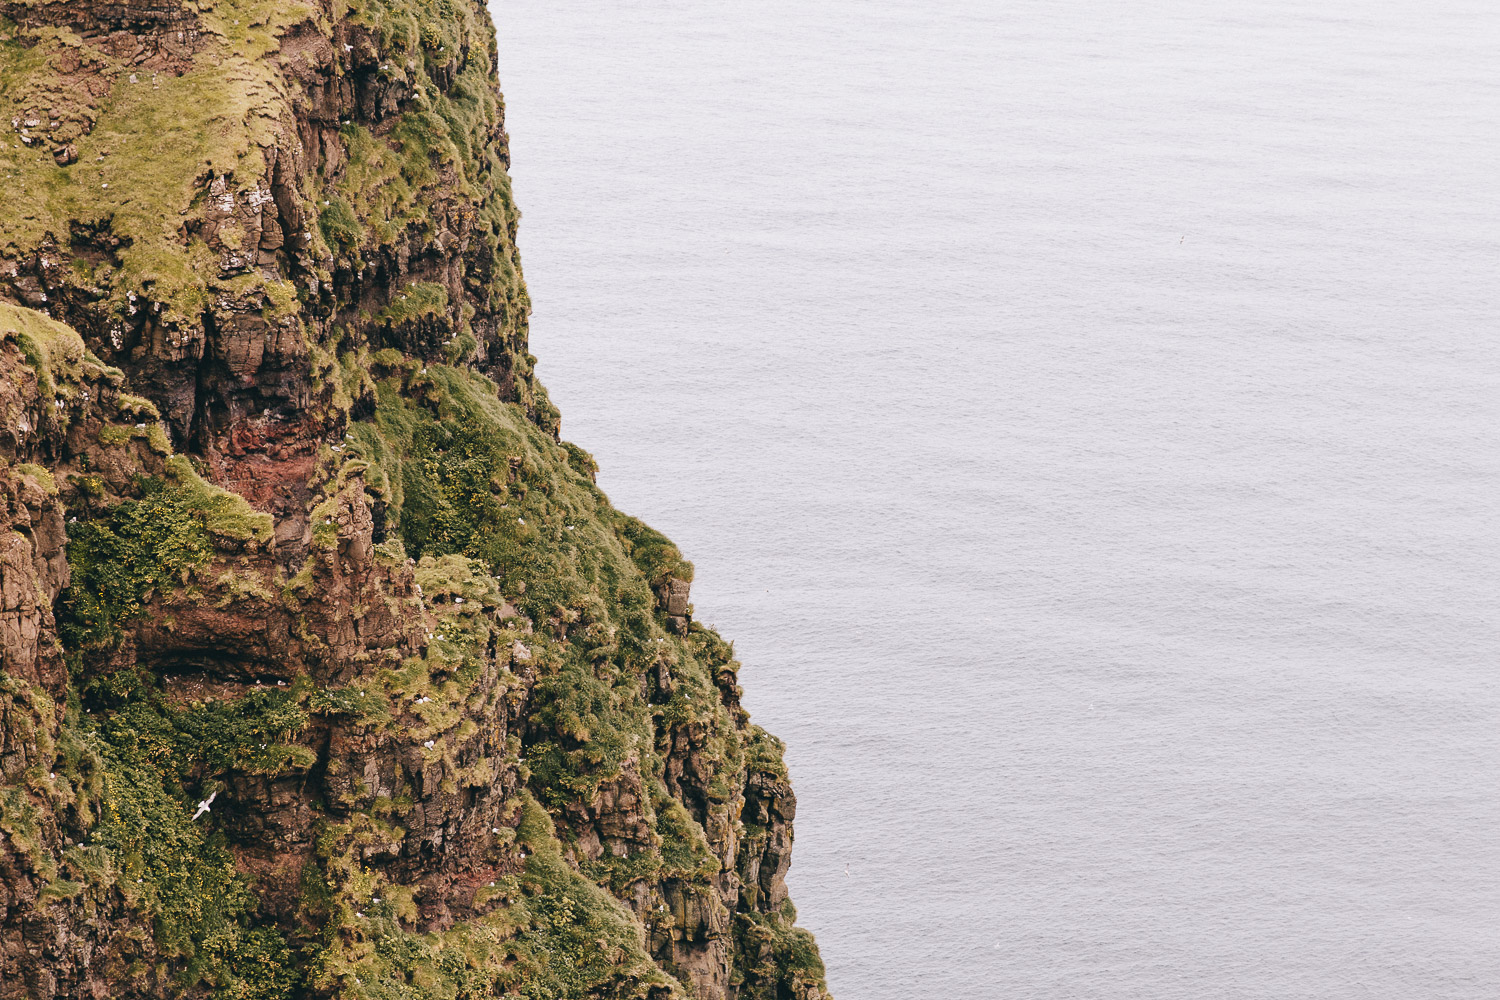 Guide to Kalsoy and the Kallur Lighthouse Hike - Faroe Islands